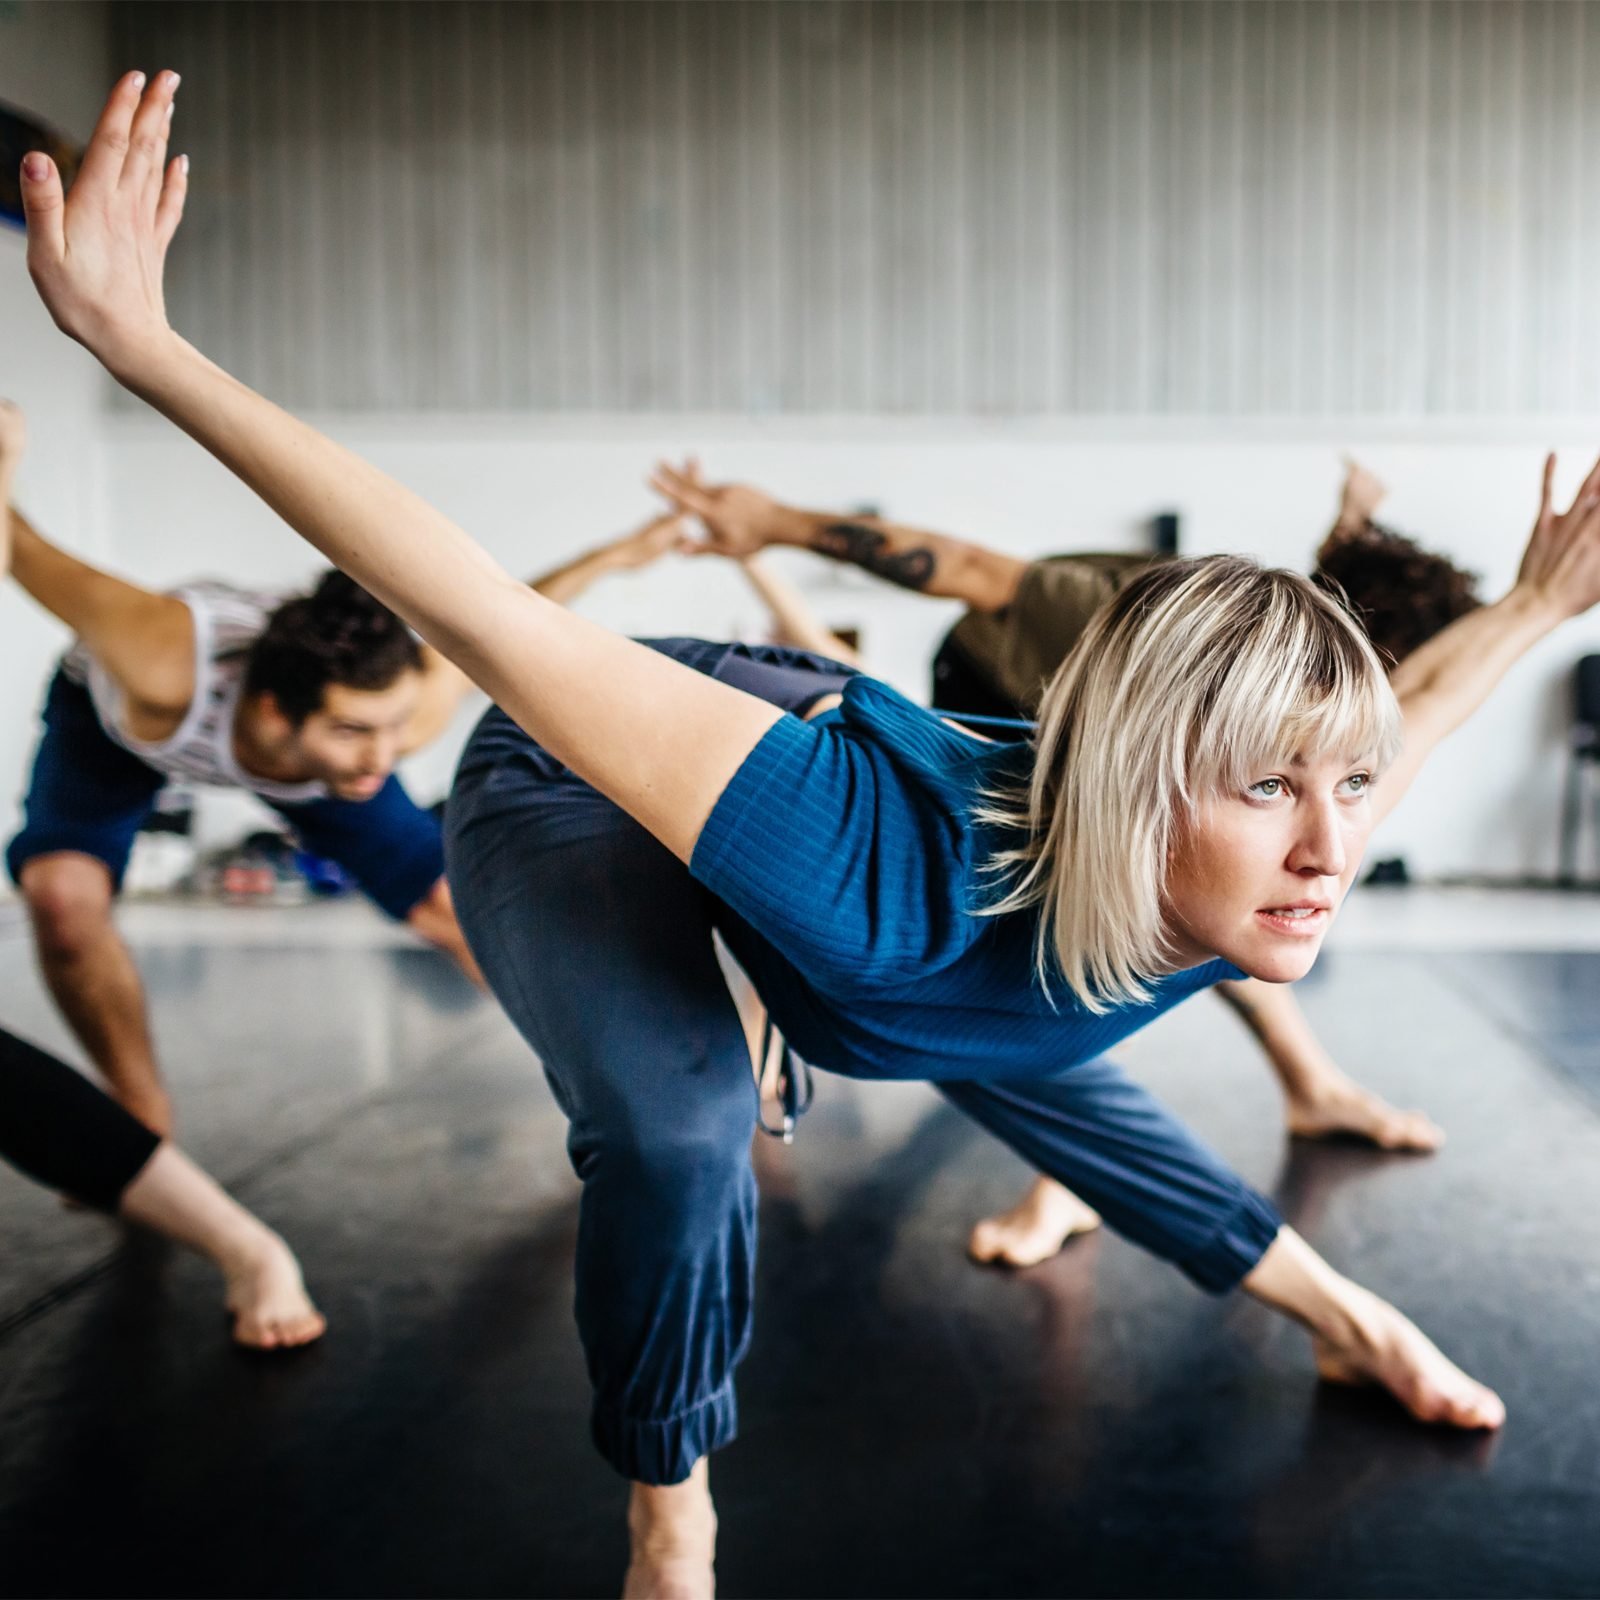 I Tried It: How Trauma-Informed Dance Therapy Helped Me Love My Body Again